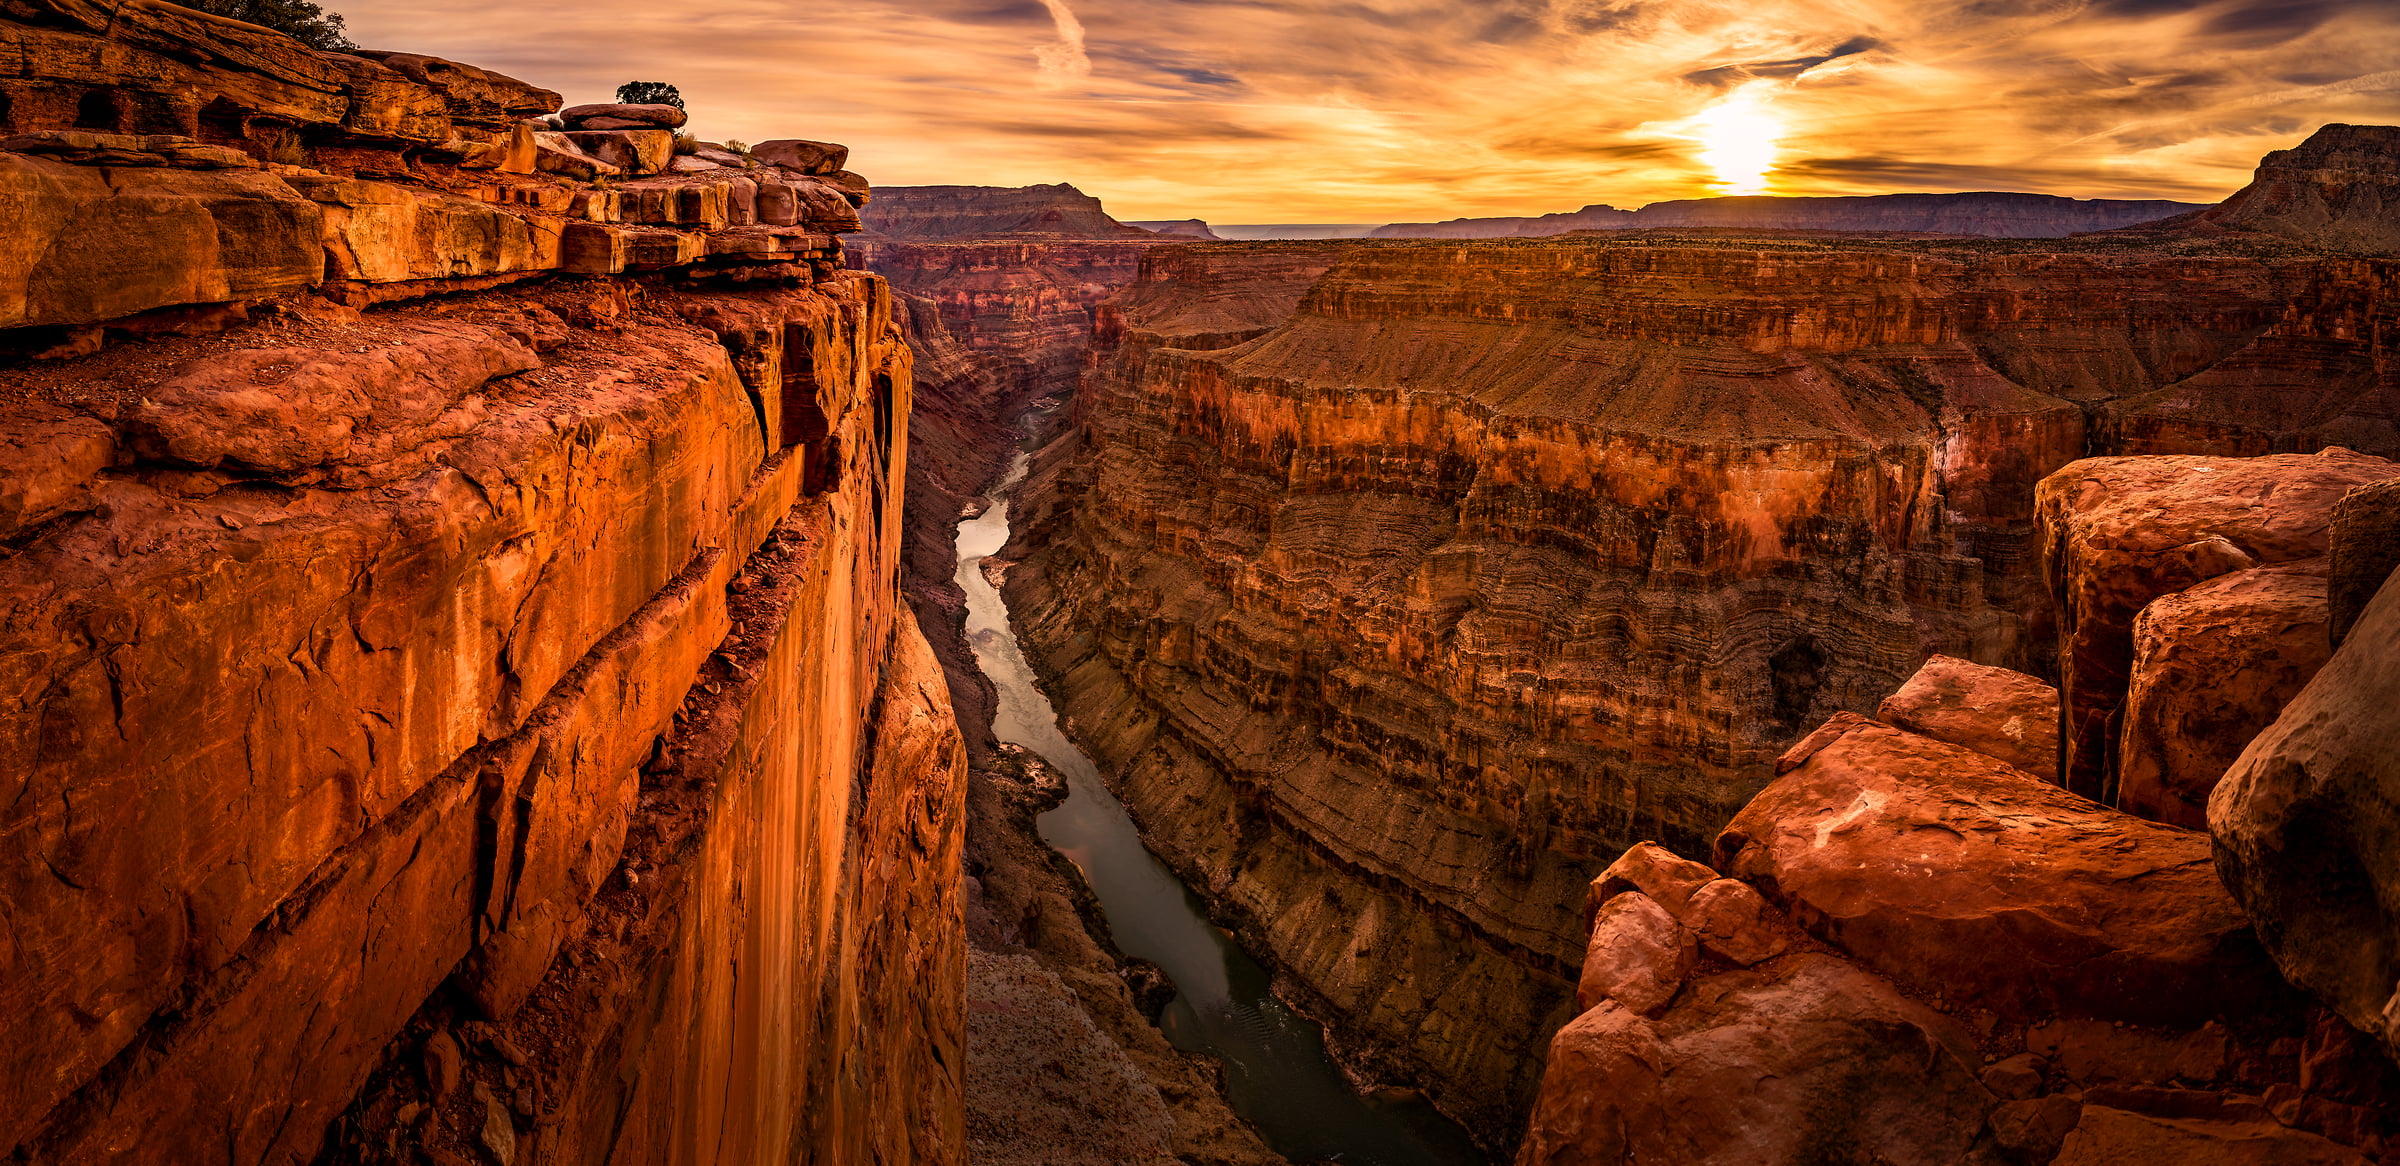 176 megapixels! A very high resolution, large-format VAST photo print of a canyon at sunset; landscape photograph created by Tim Shields in Grand Canyon National Park, Arizona, USA